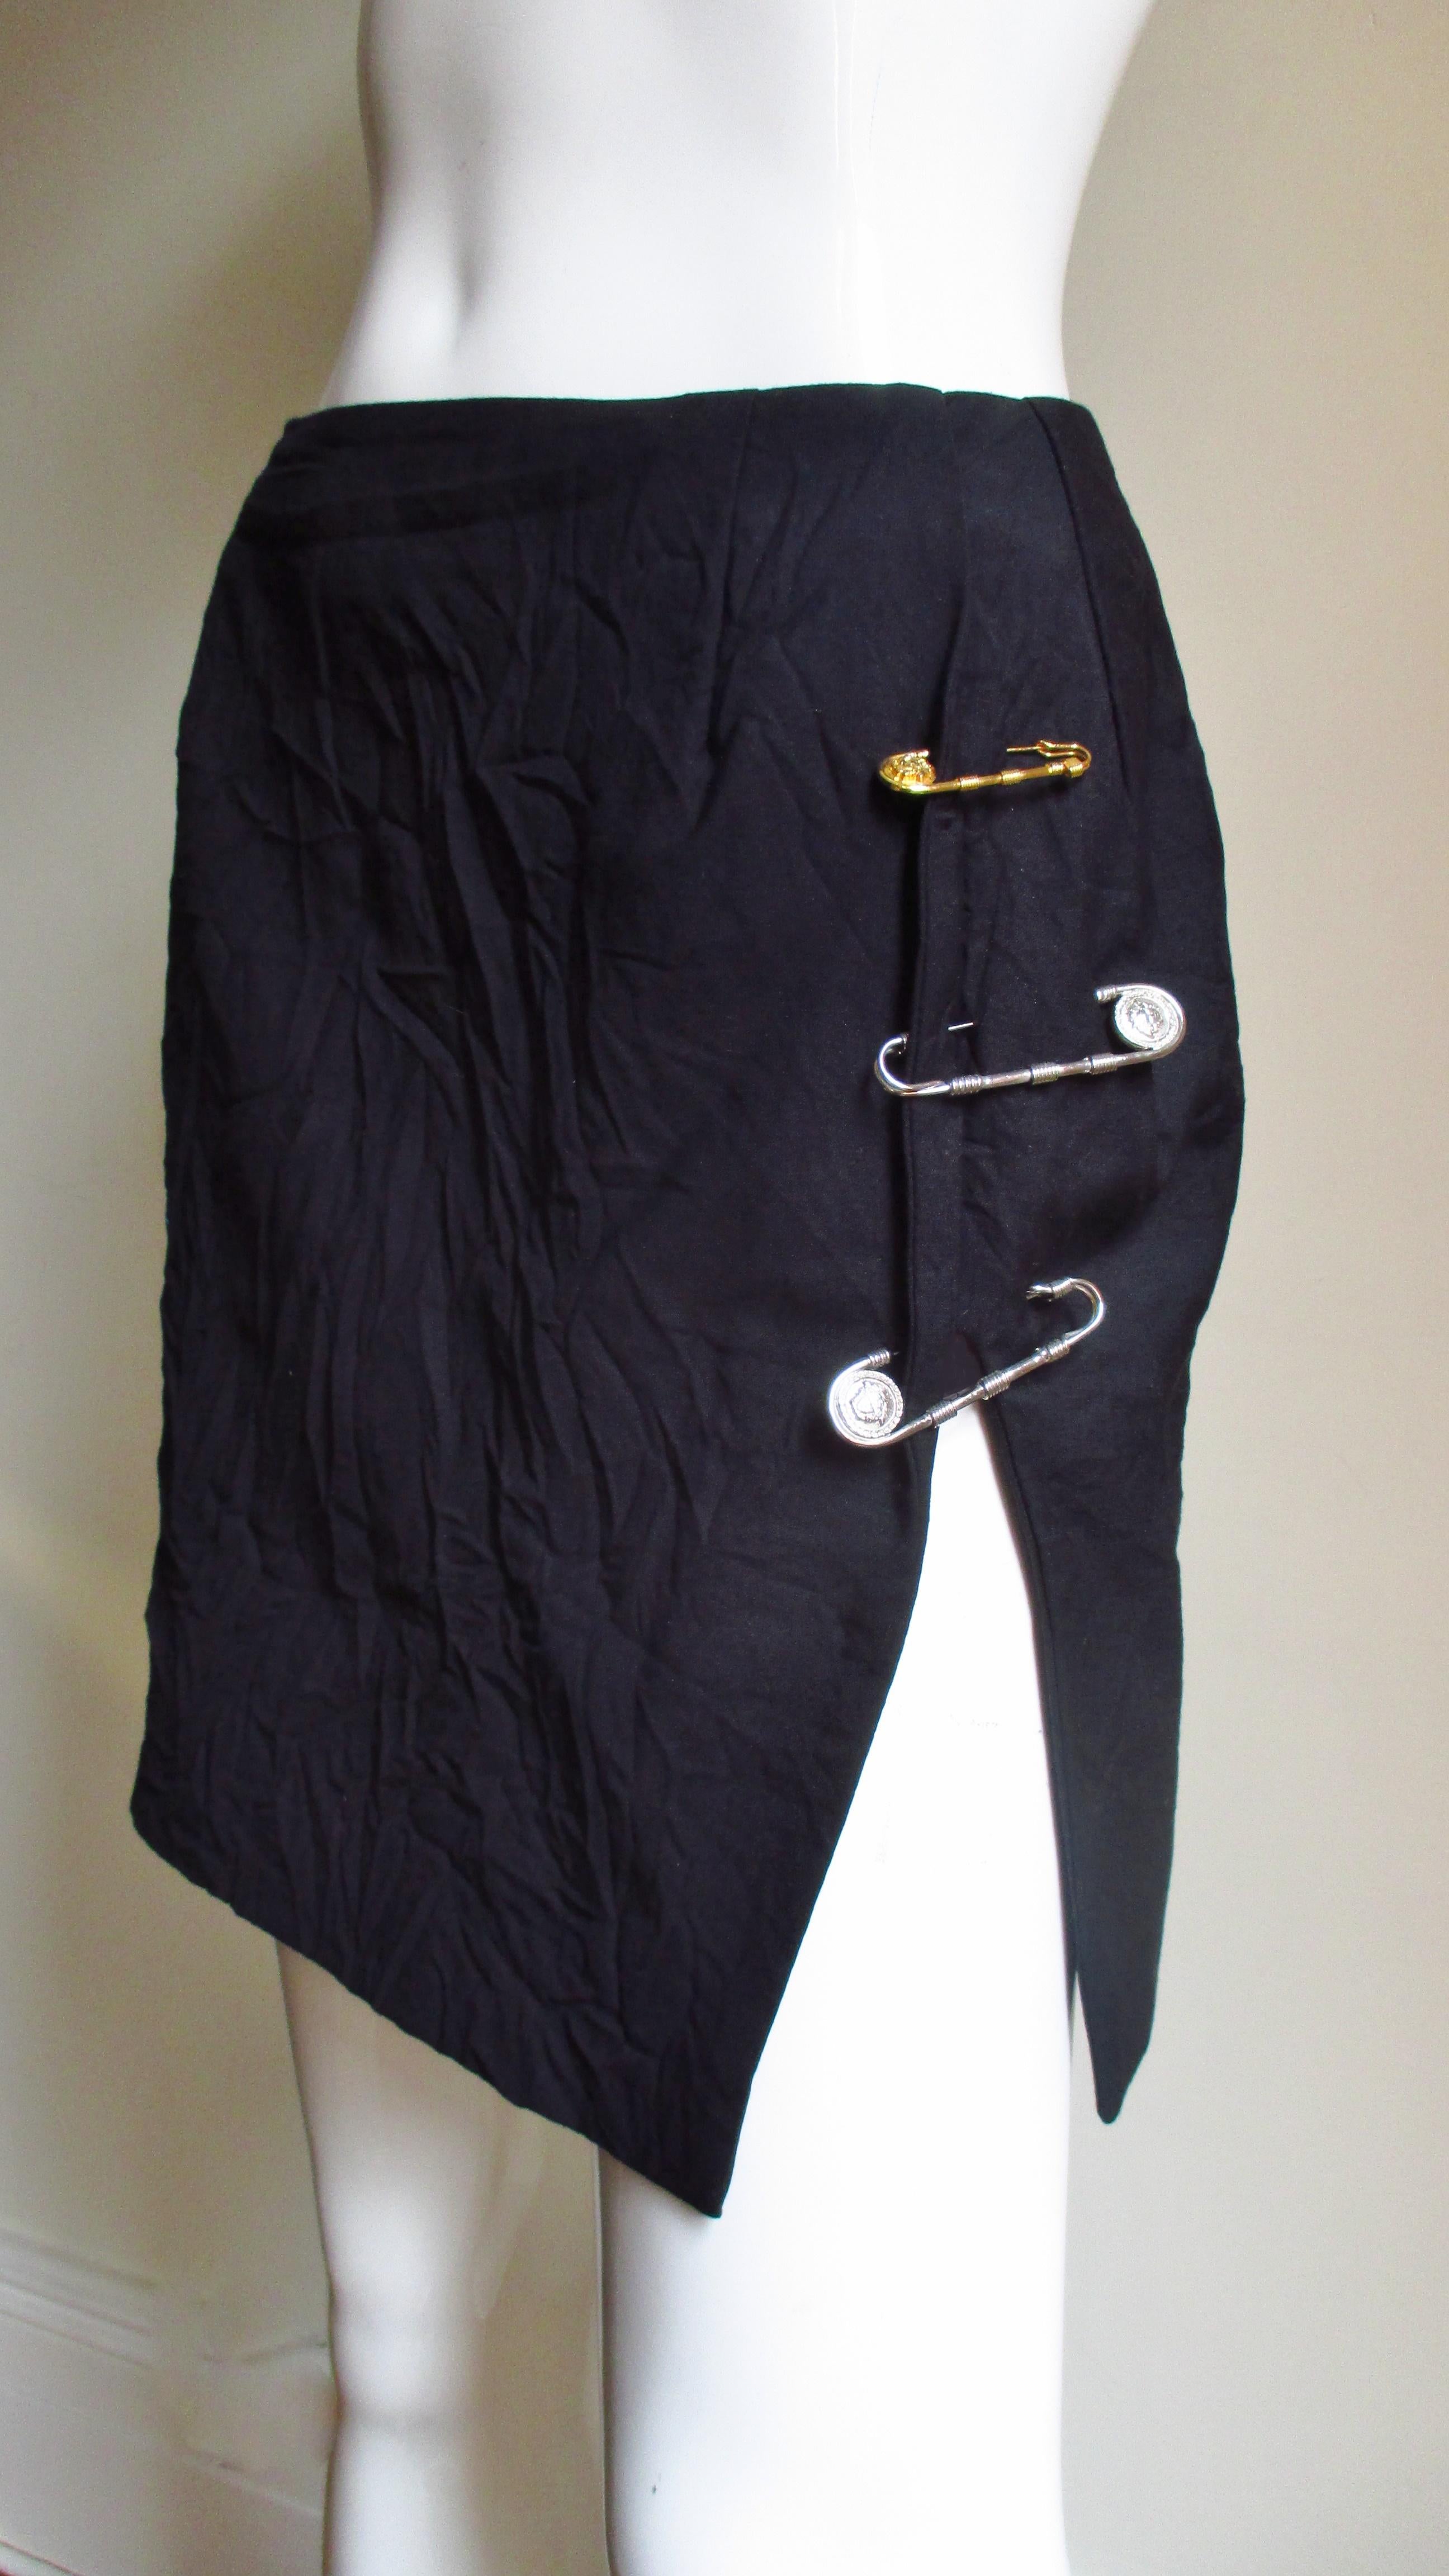 1990s Iconic Gianni Versace Safety Pin Skirt 1